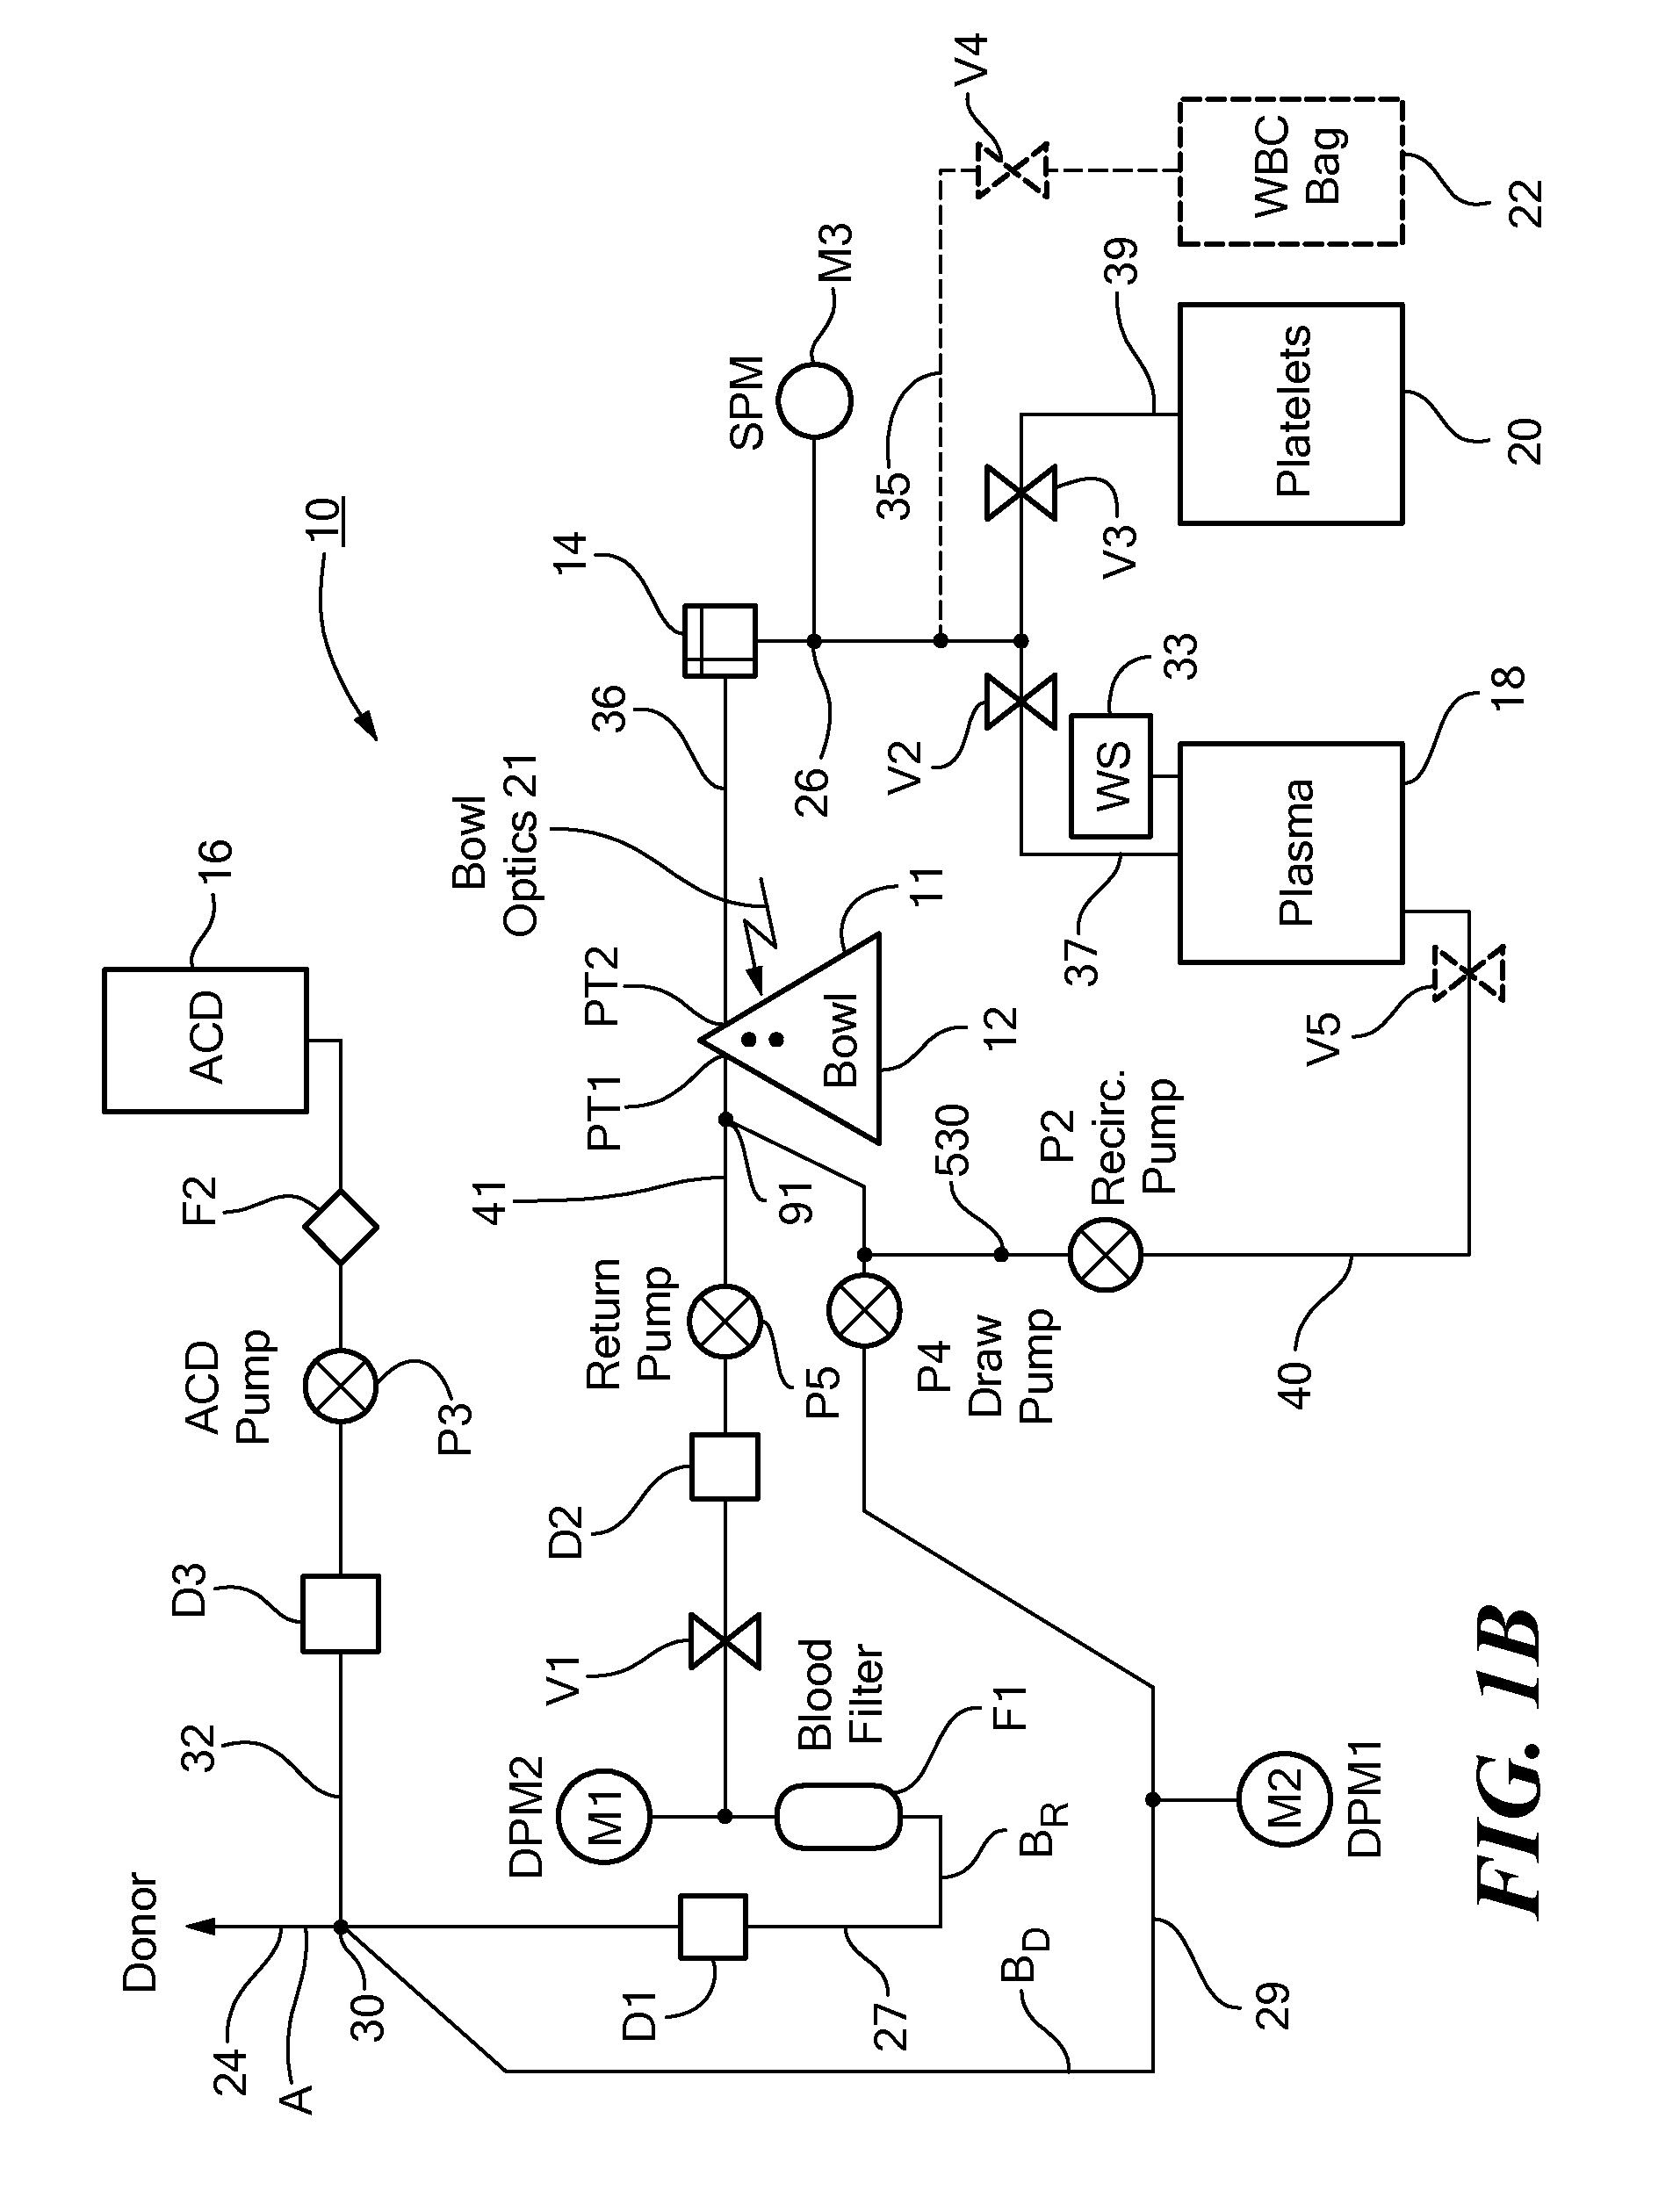 System and Method for Optimized Apheresis Draw and Return